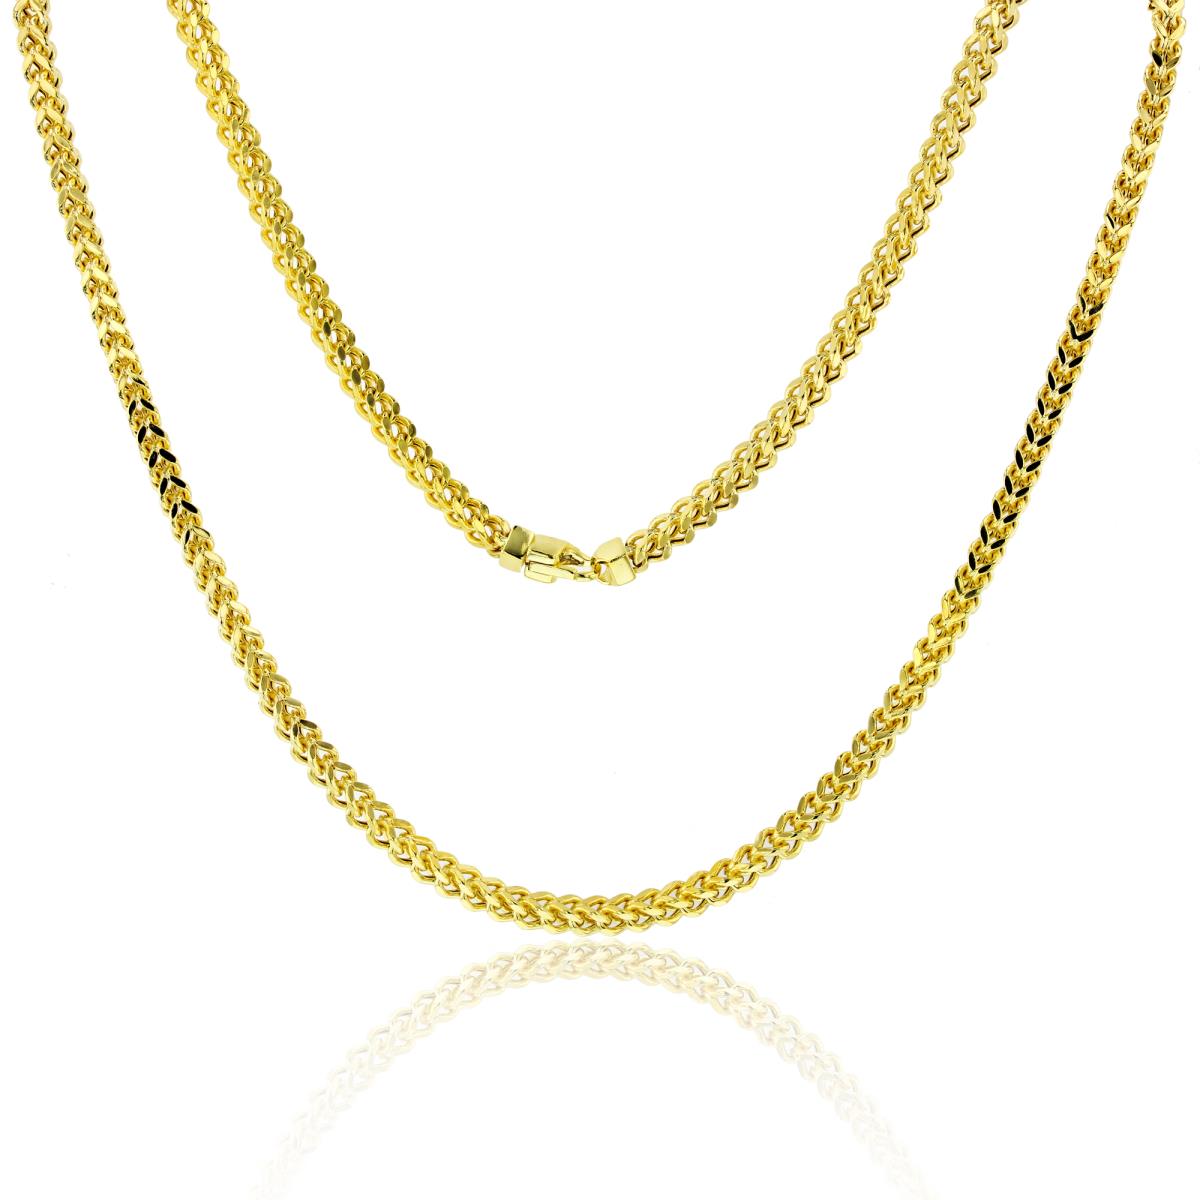 10K Yellow Gold 4.80mm 24" 150 Hollow Franco Chain